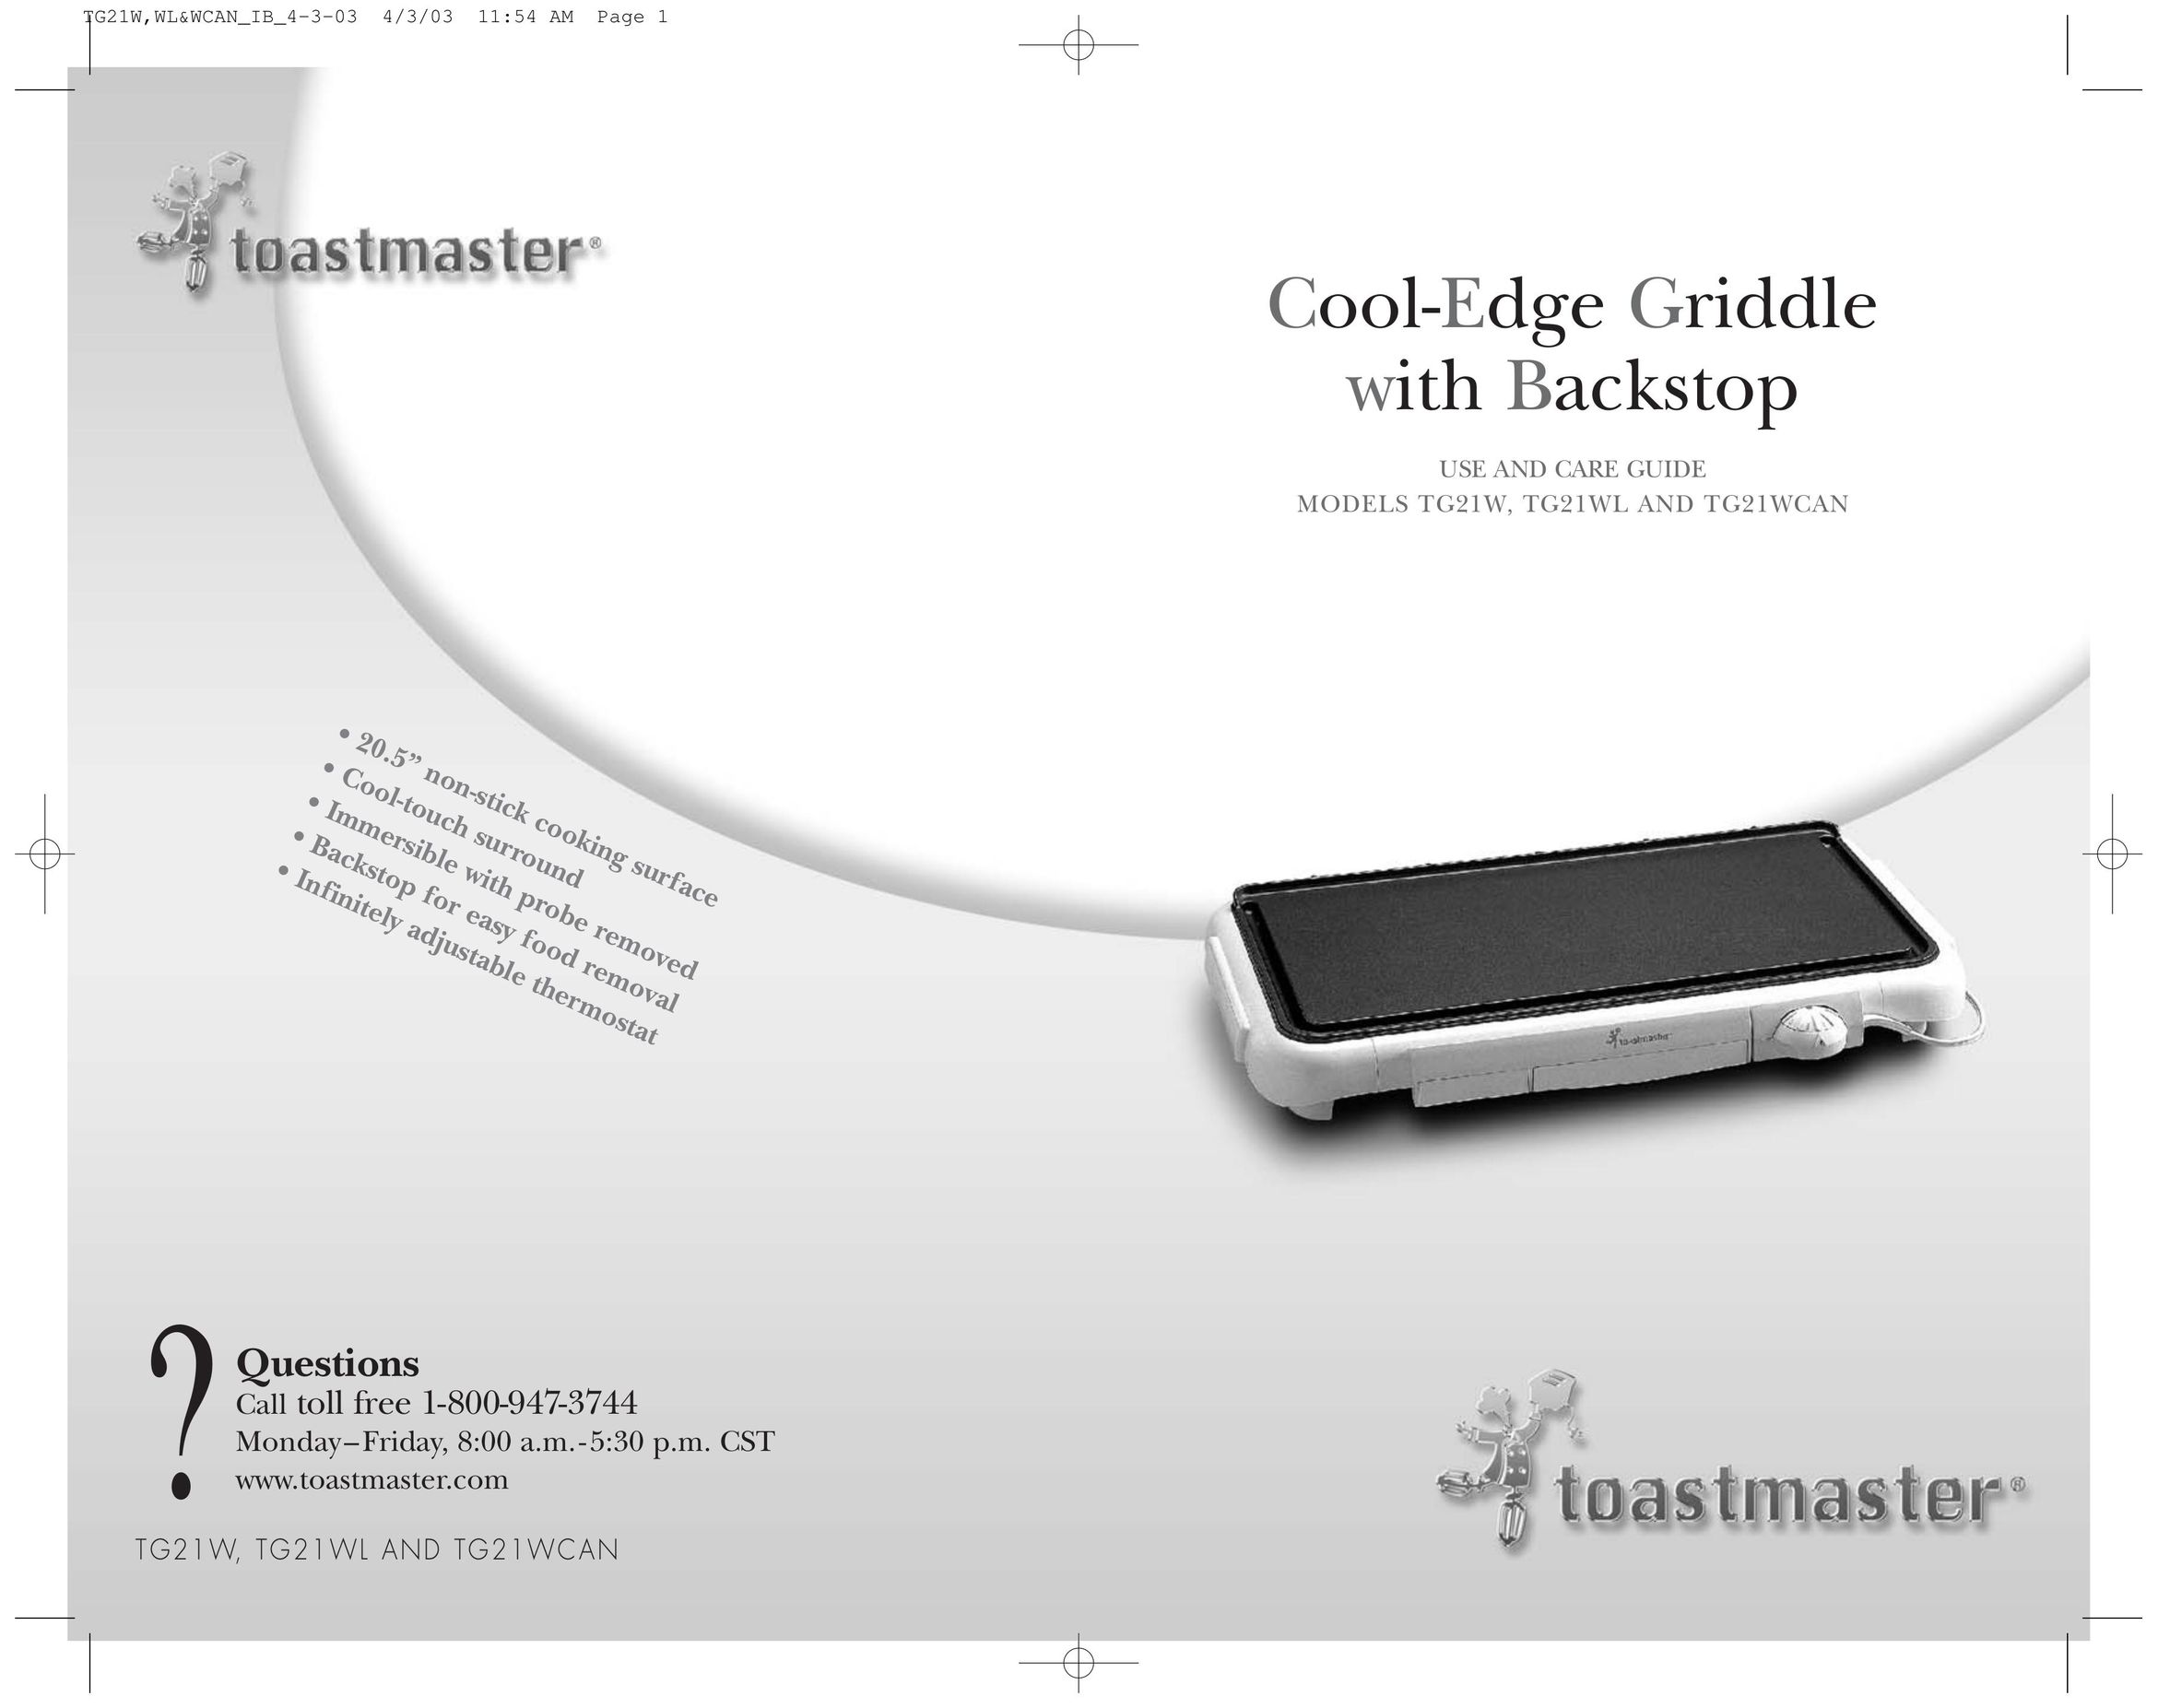 Toastmaster TG21W Griddle User Manual